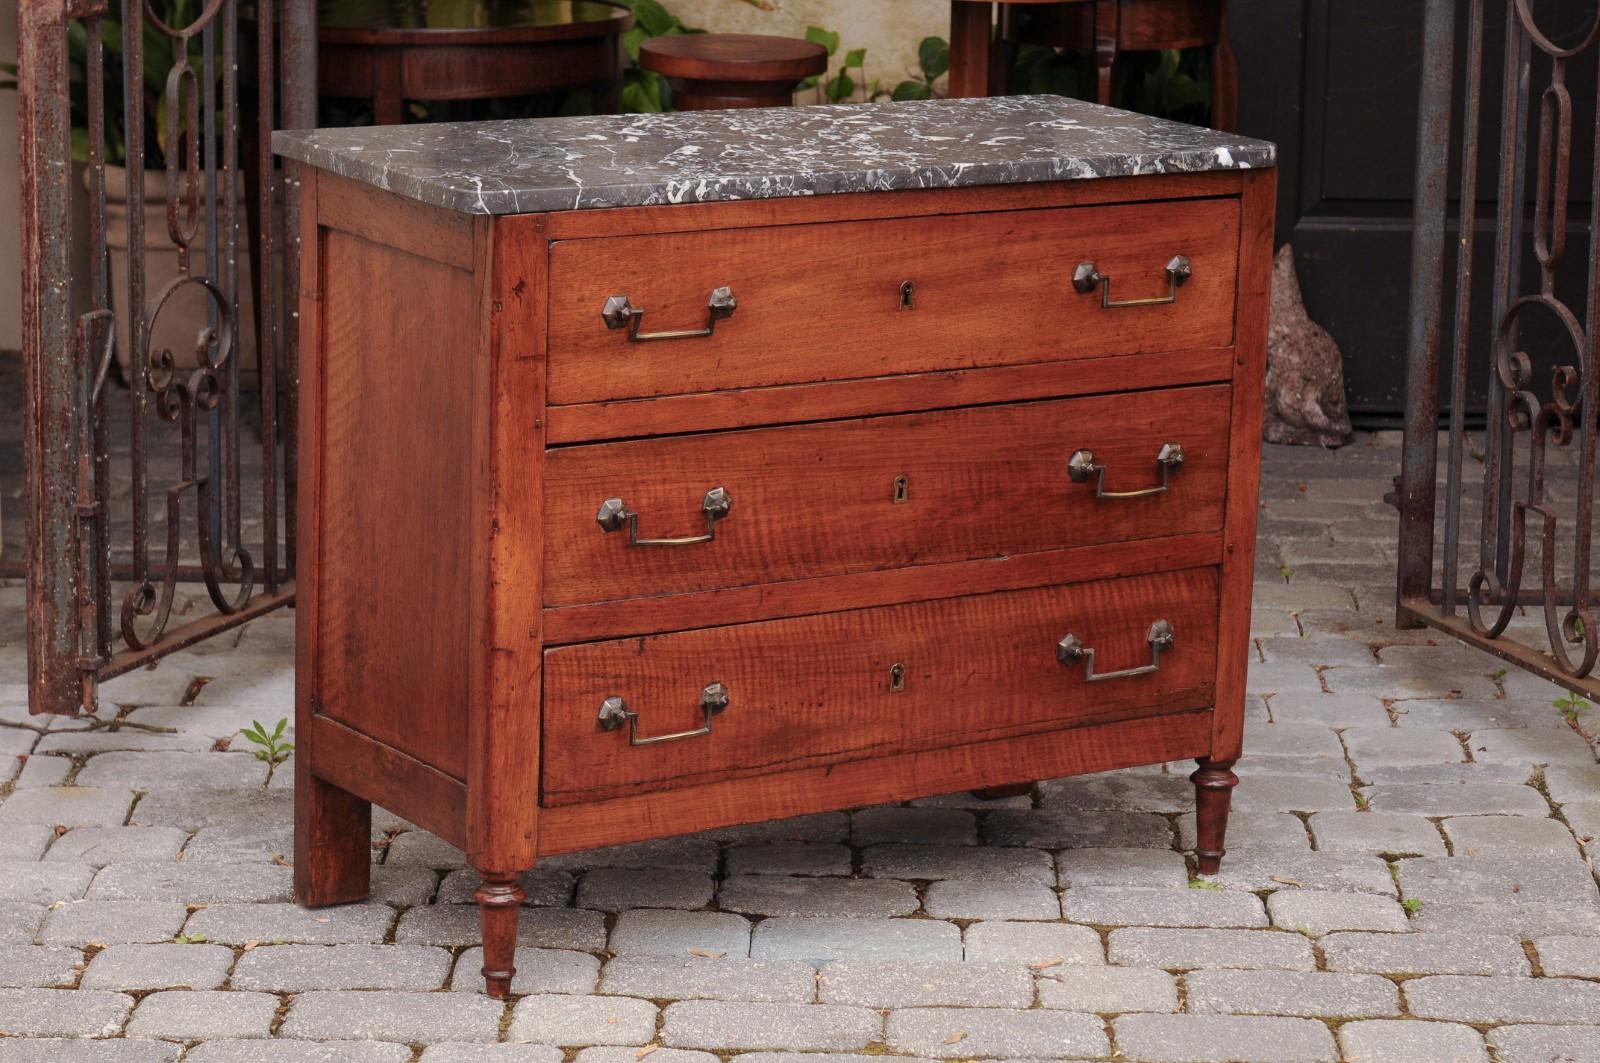 A French Napoleon III period walnut three-drawer commode from the mid 19th century, with grey variegated marble top and turned feet. Born in France during the early years of Emperor Napoleon III's reign, this elegant commode features a grey